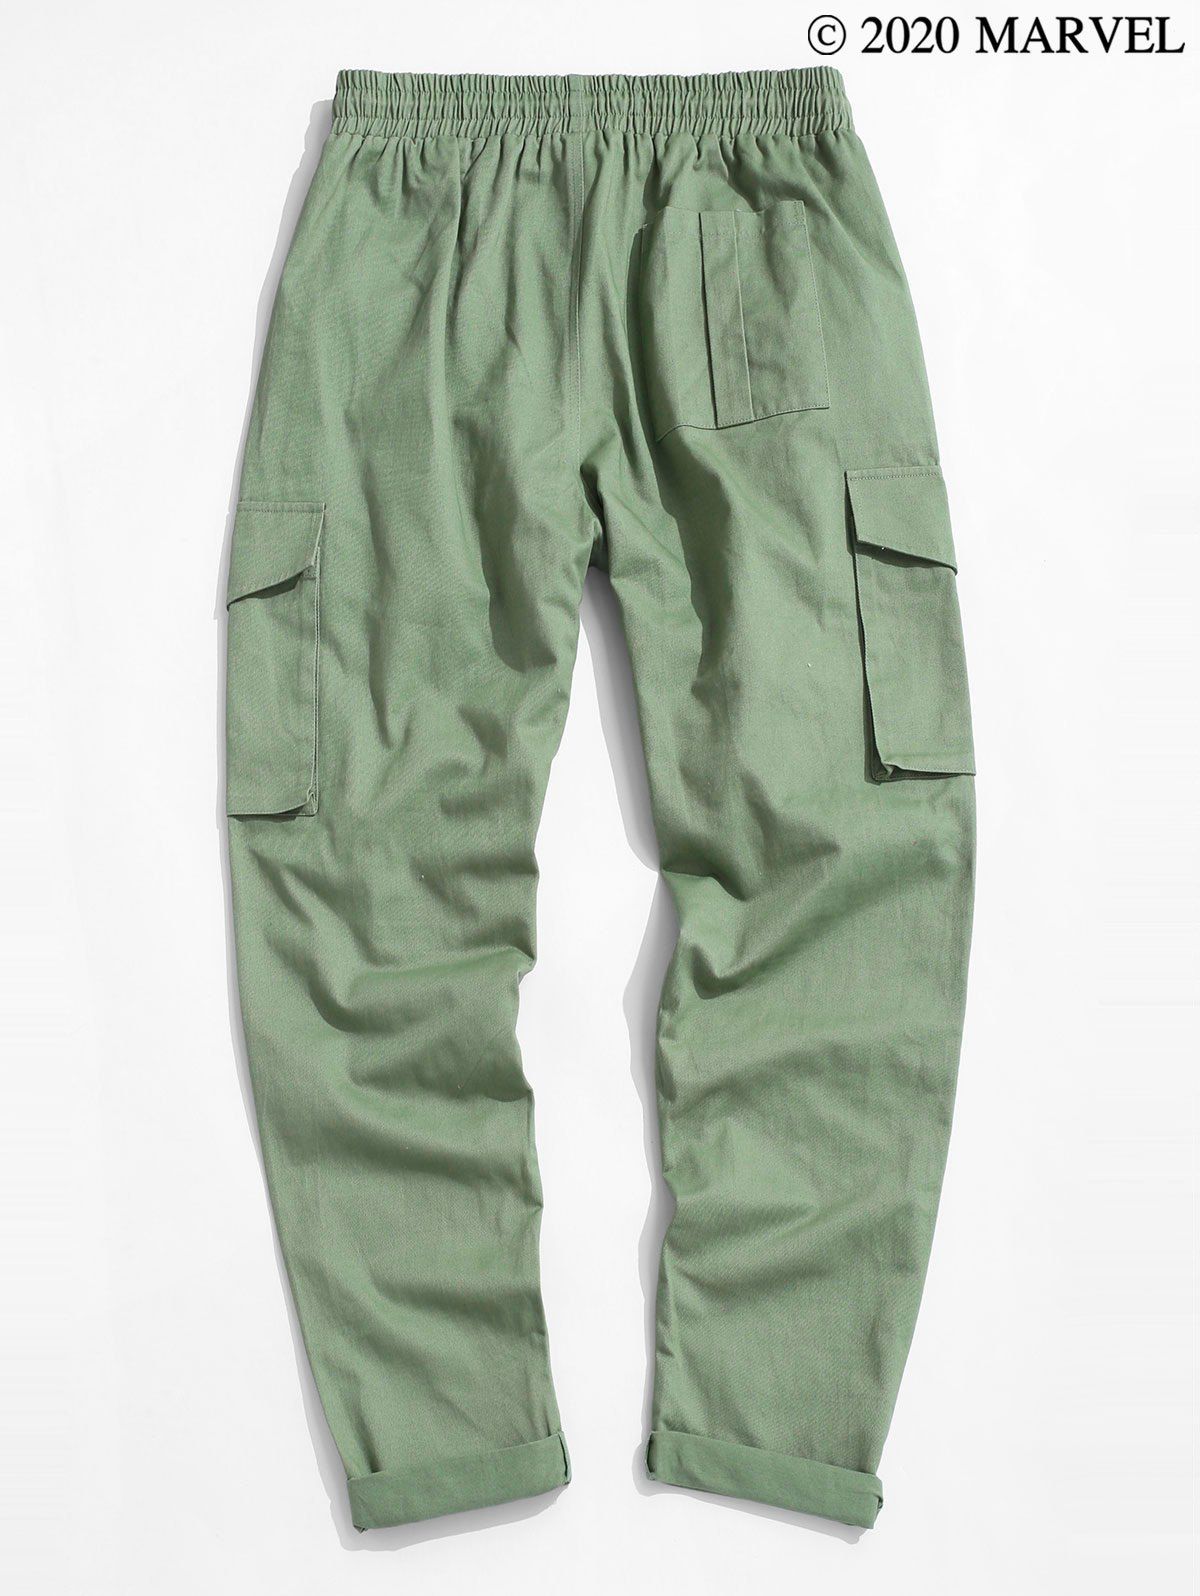 [36% OFF] 2021 Marvel Spider-Man Patched Cargo Pants In SEA GREEN ...